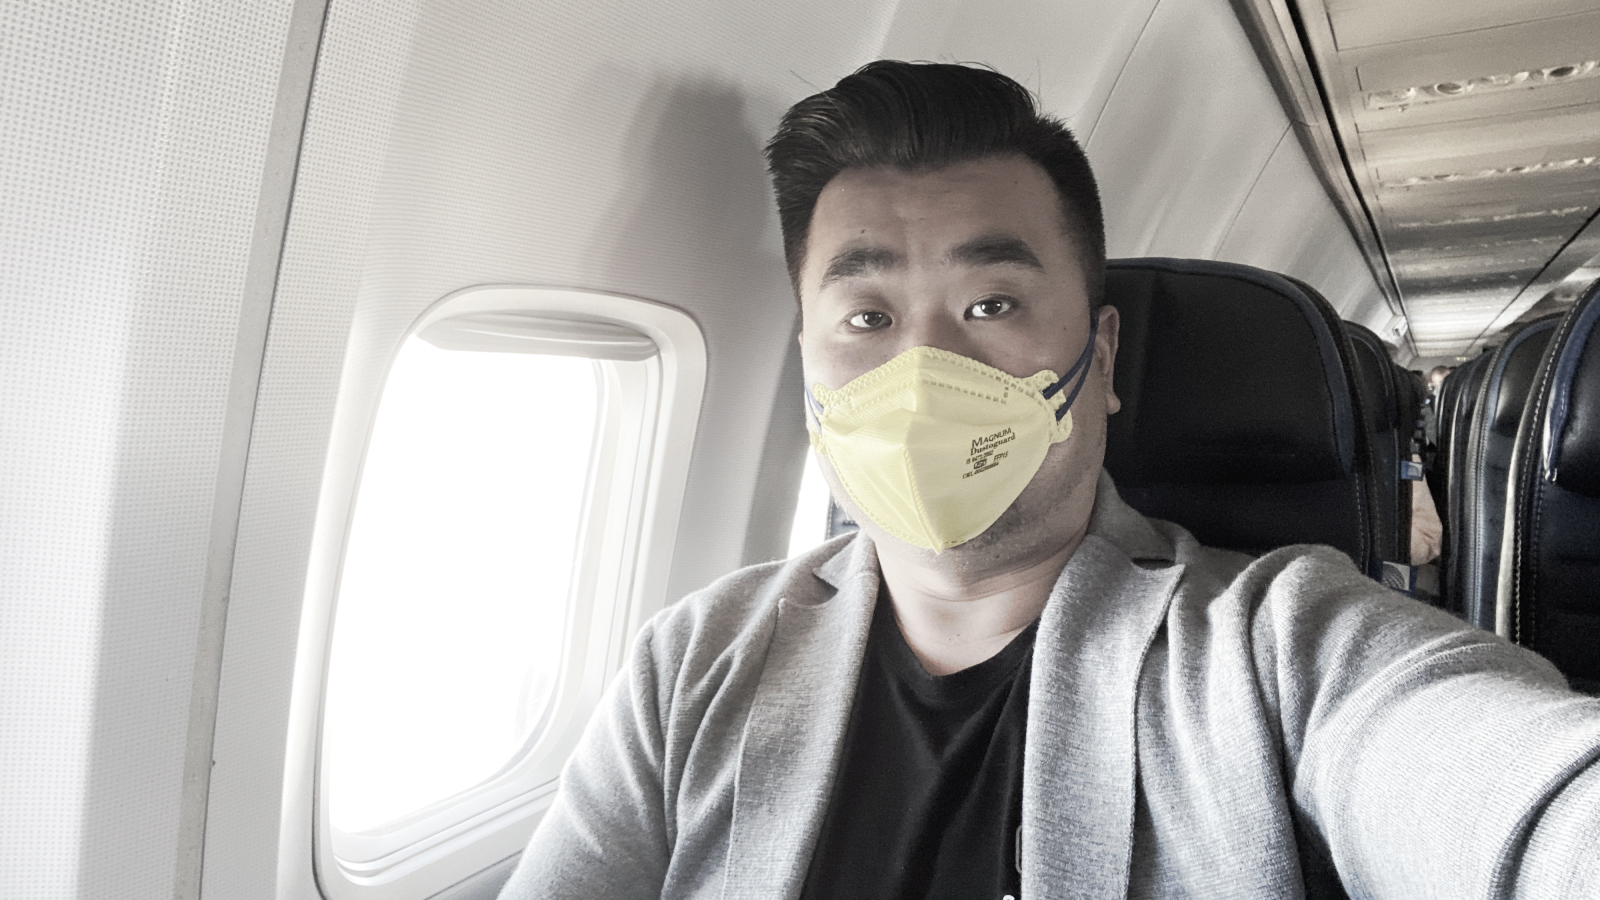 US Canadian airlines require face masks